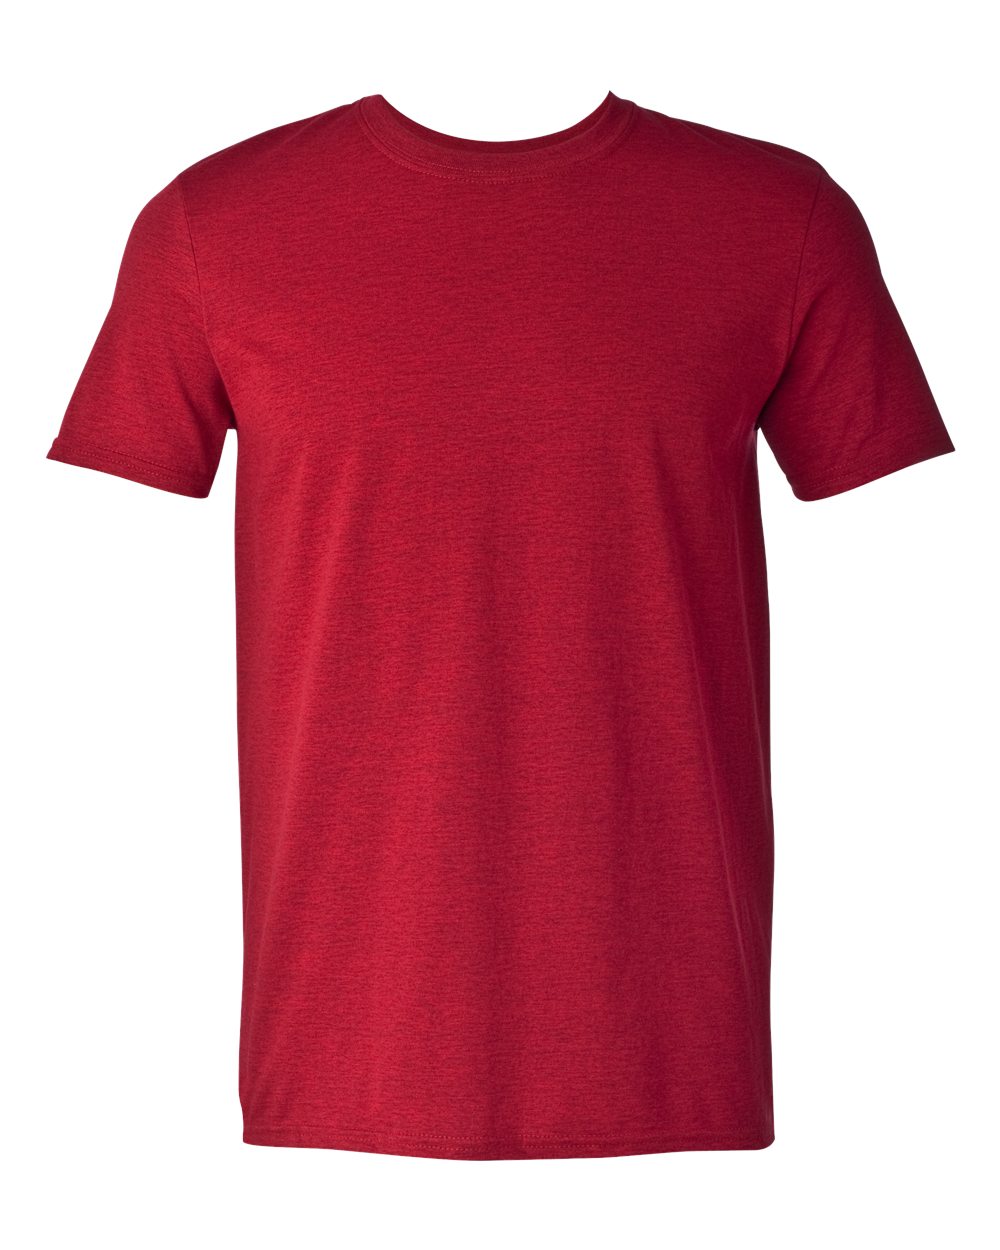 Gildan Softstyle Tee (64000) in Antique Cherry Red